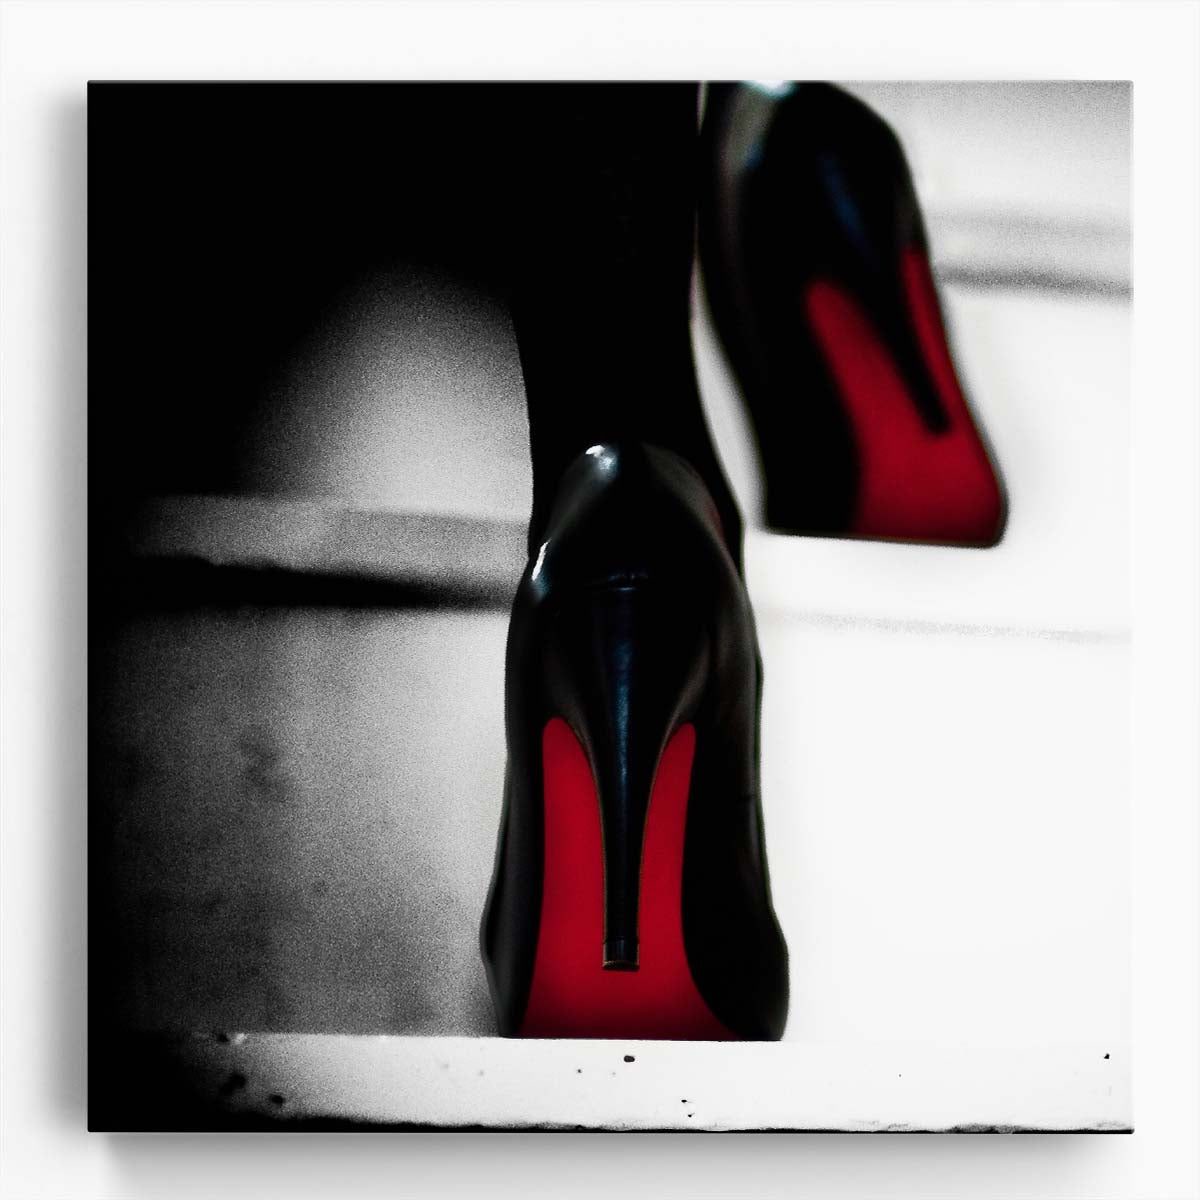 Abstract Parisian Louboutin High Heels Photography Wall Art by Luxuriance Designs. Made in USA.